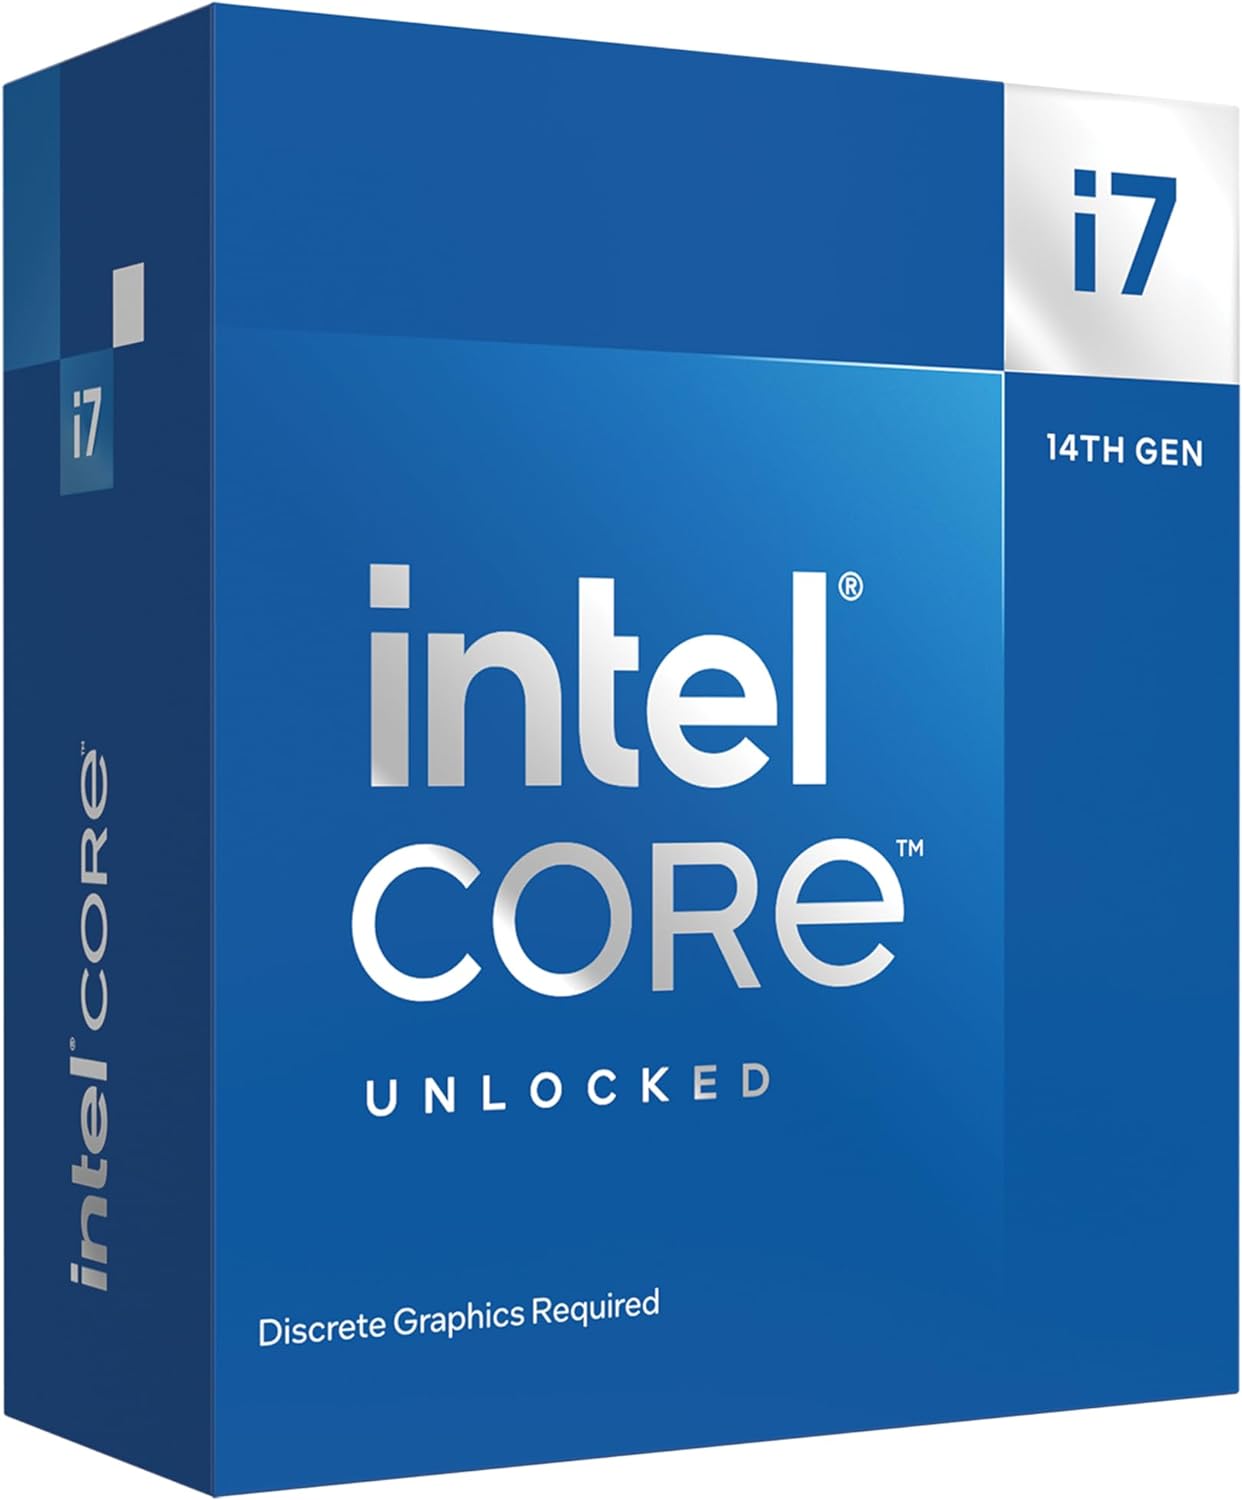 Intel Core i7-14700KF Gaming Processor - Unlocked, 20 cores for ultimate performance 0735858546942